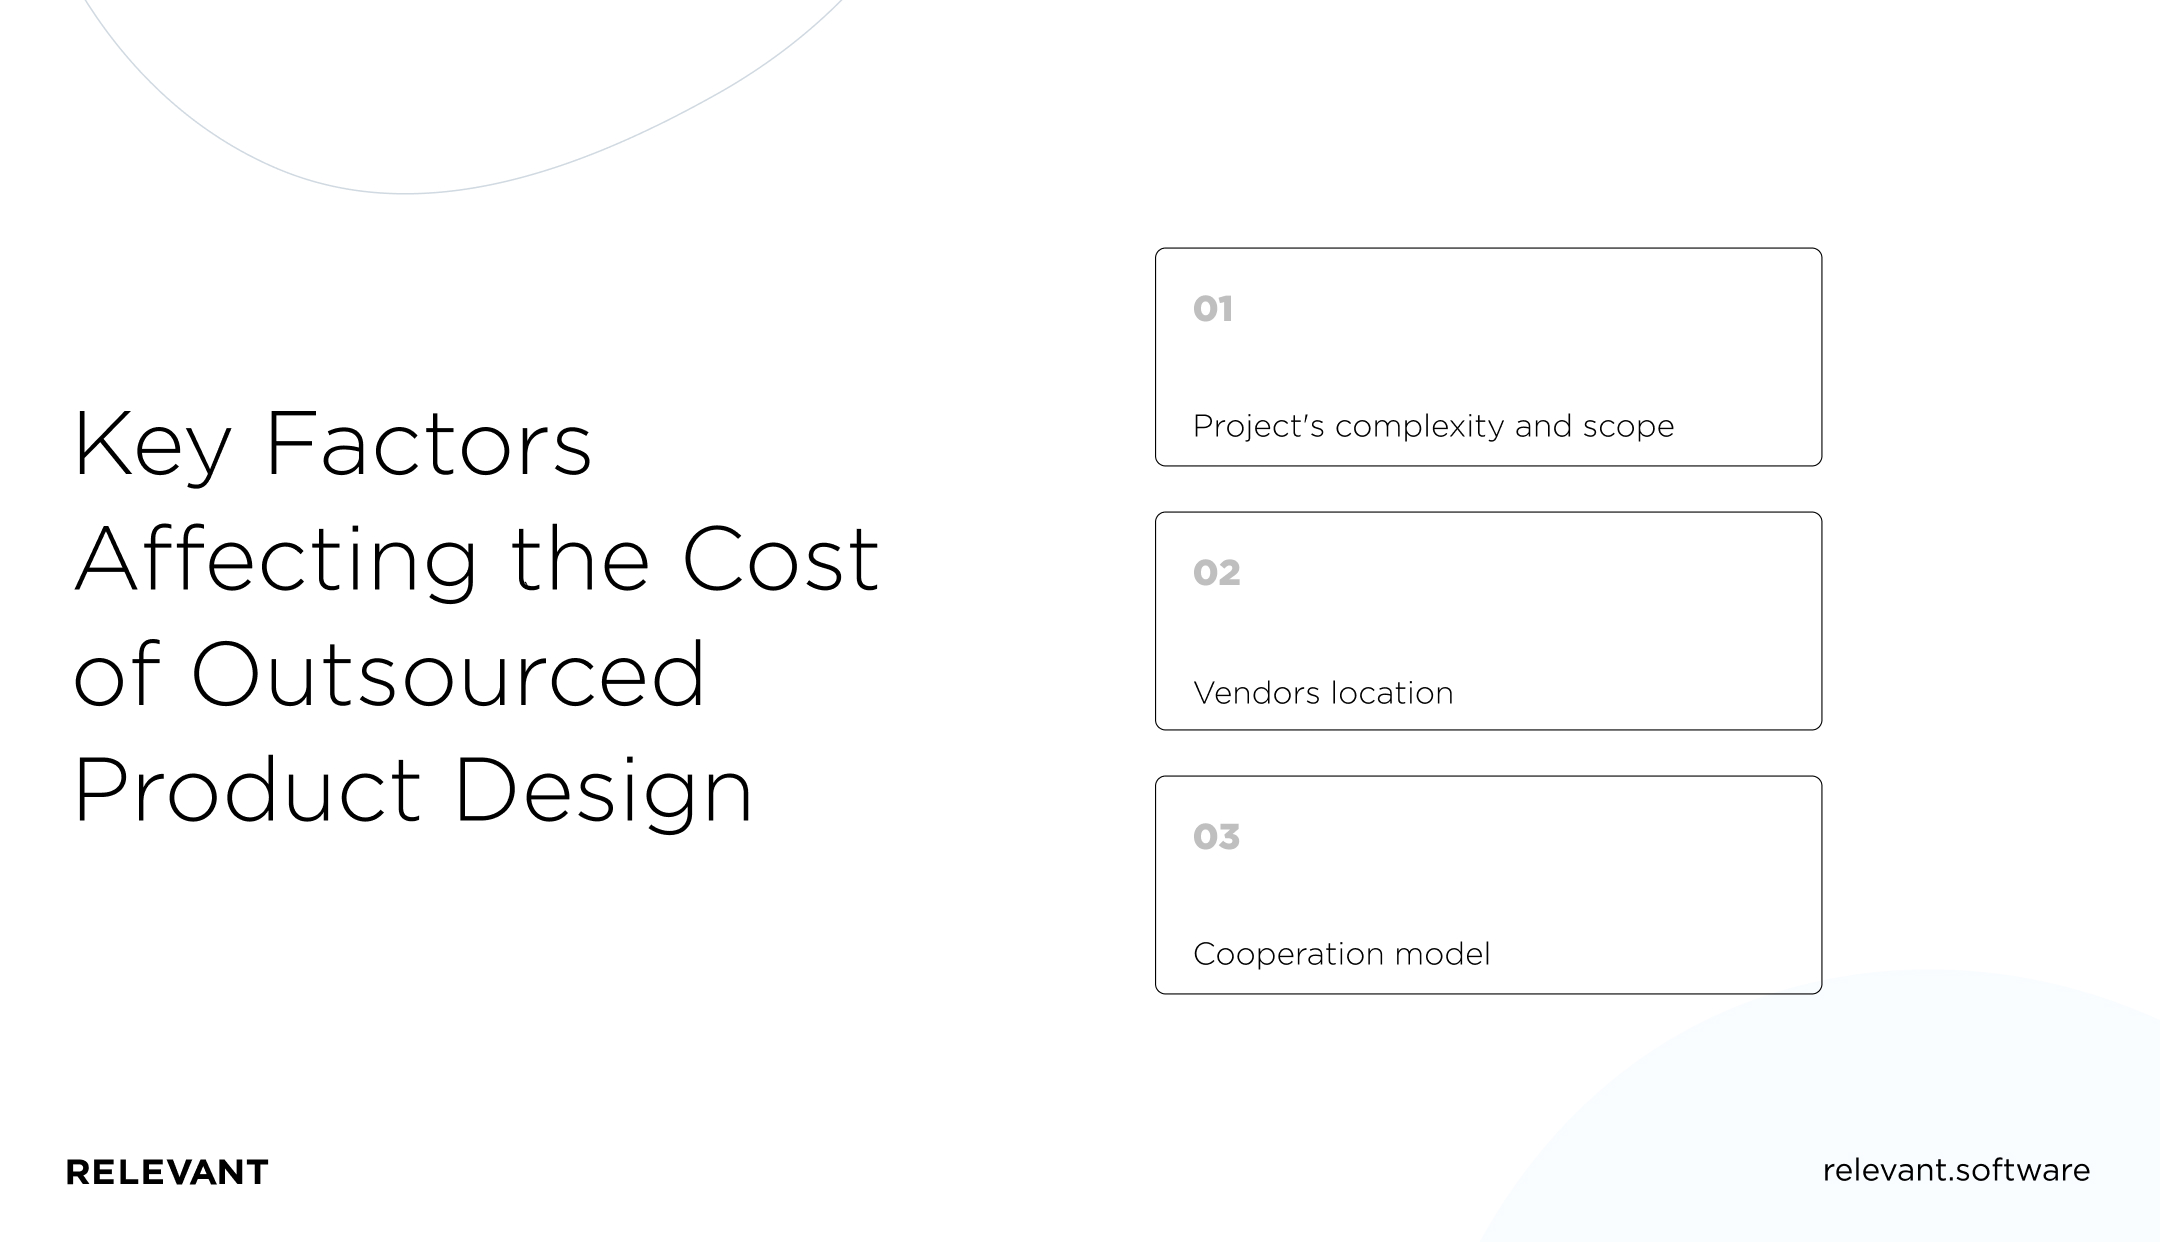 Key Factors Affecting the Cost of Outsourced Product Design